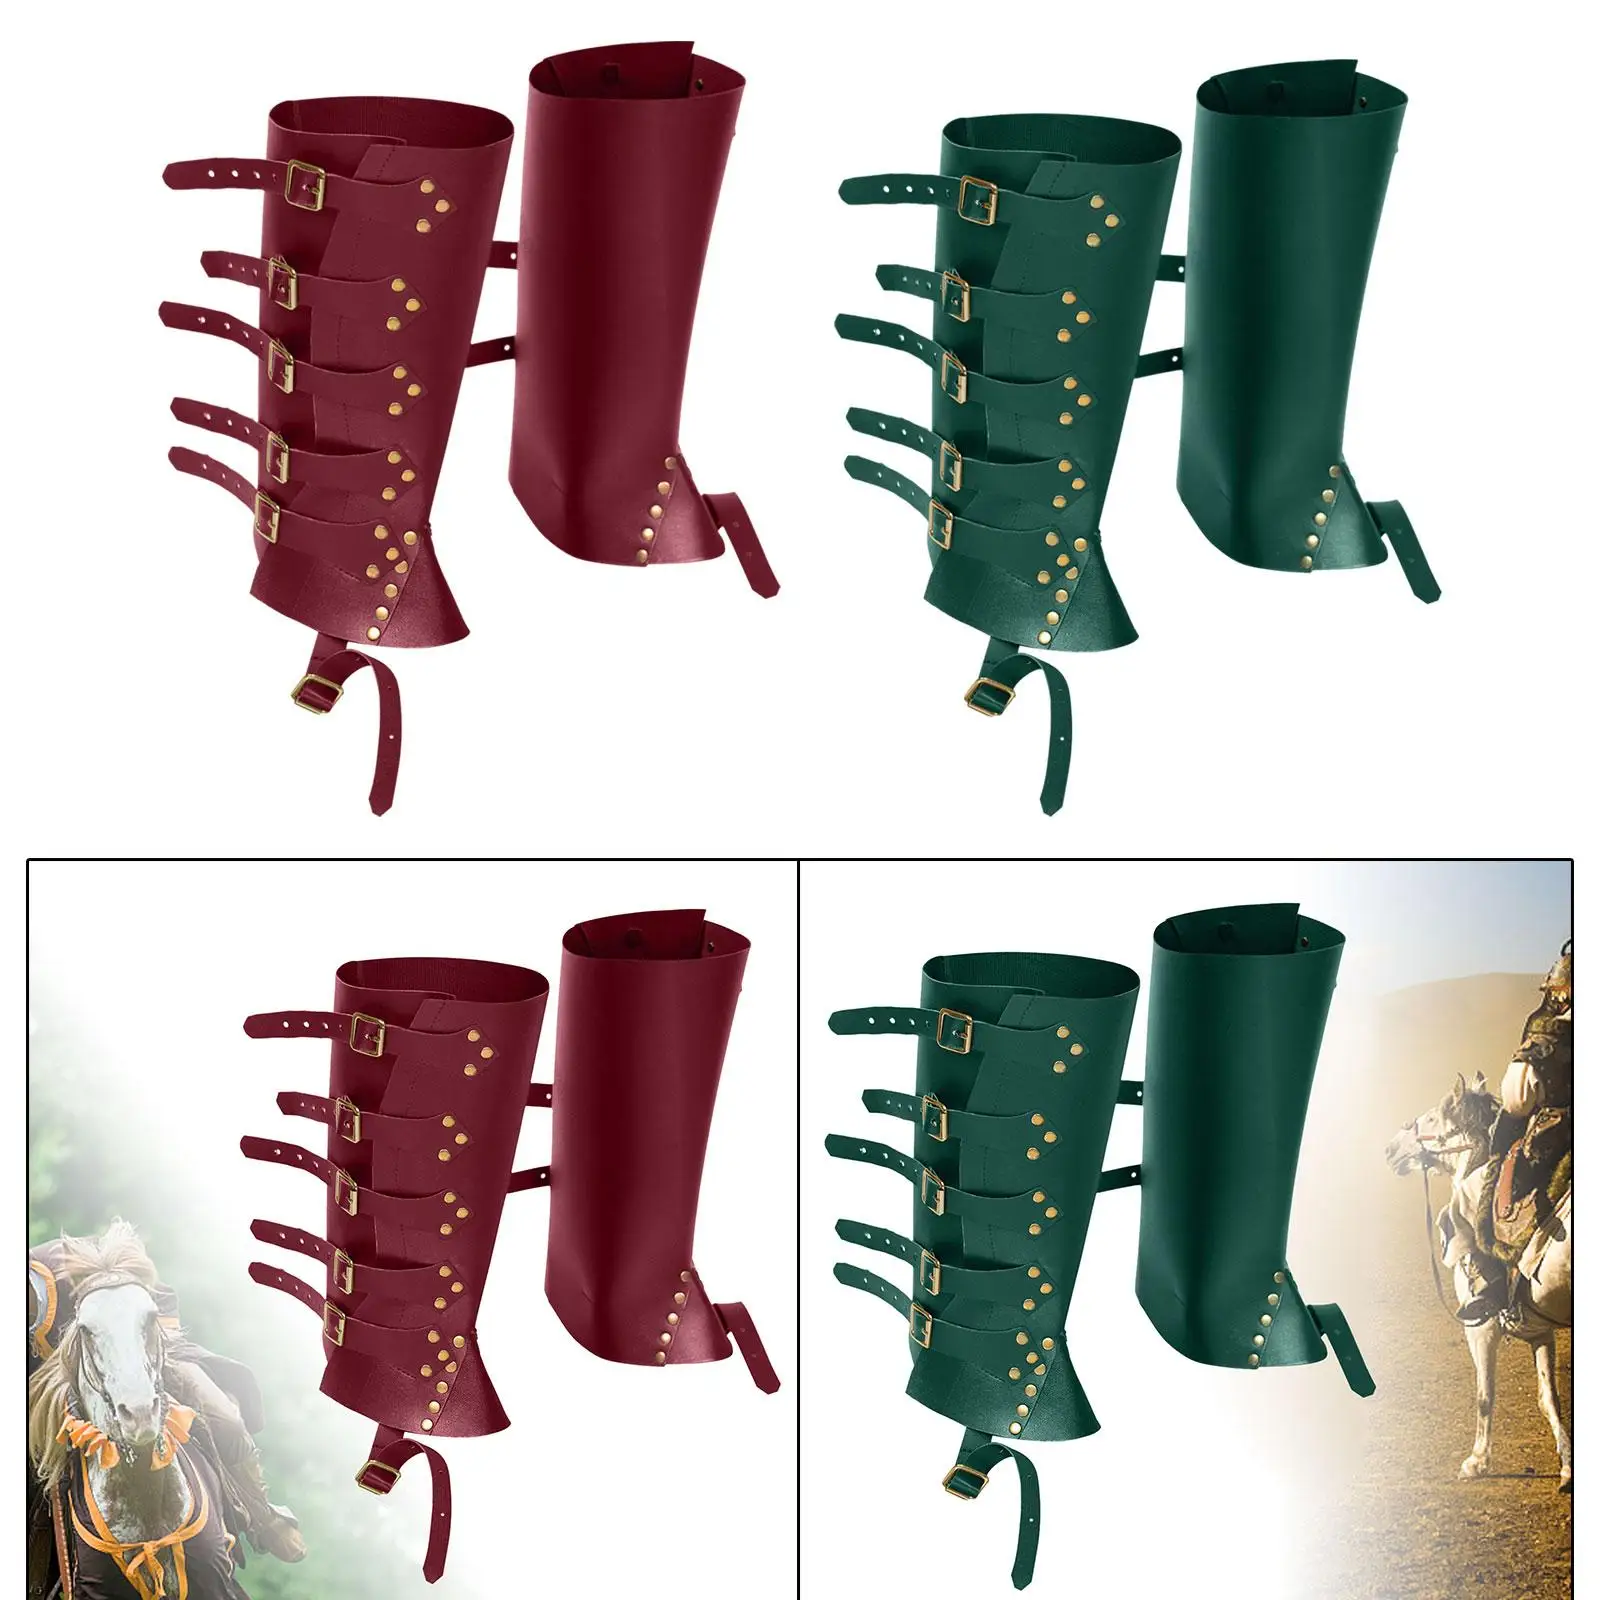 Medieval Boots Shoes Cover Novelty Adjustable for Halloween Steampunk Faux Leather Medieval Lace up Buckle Boots Knight Costume